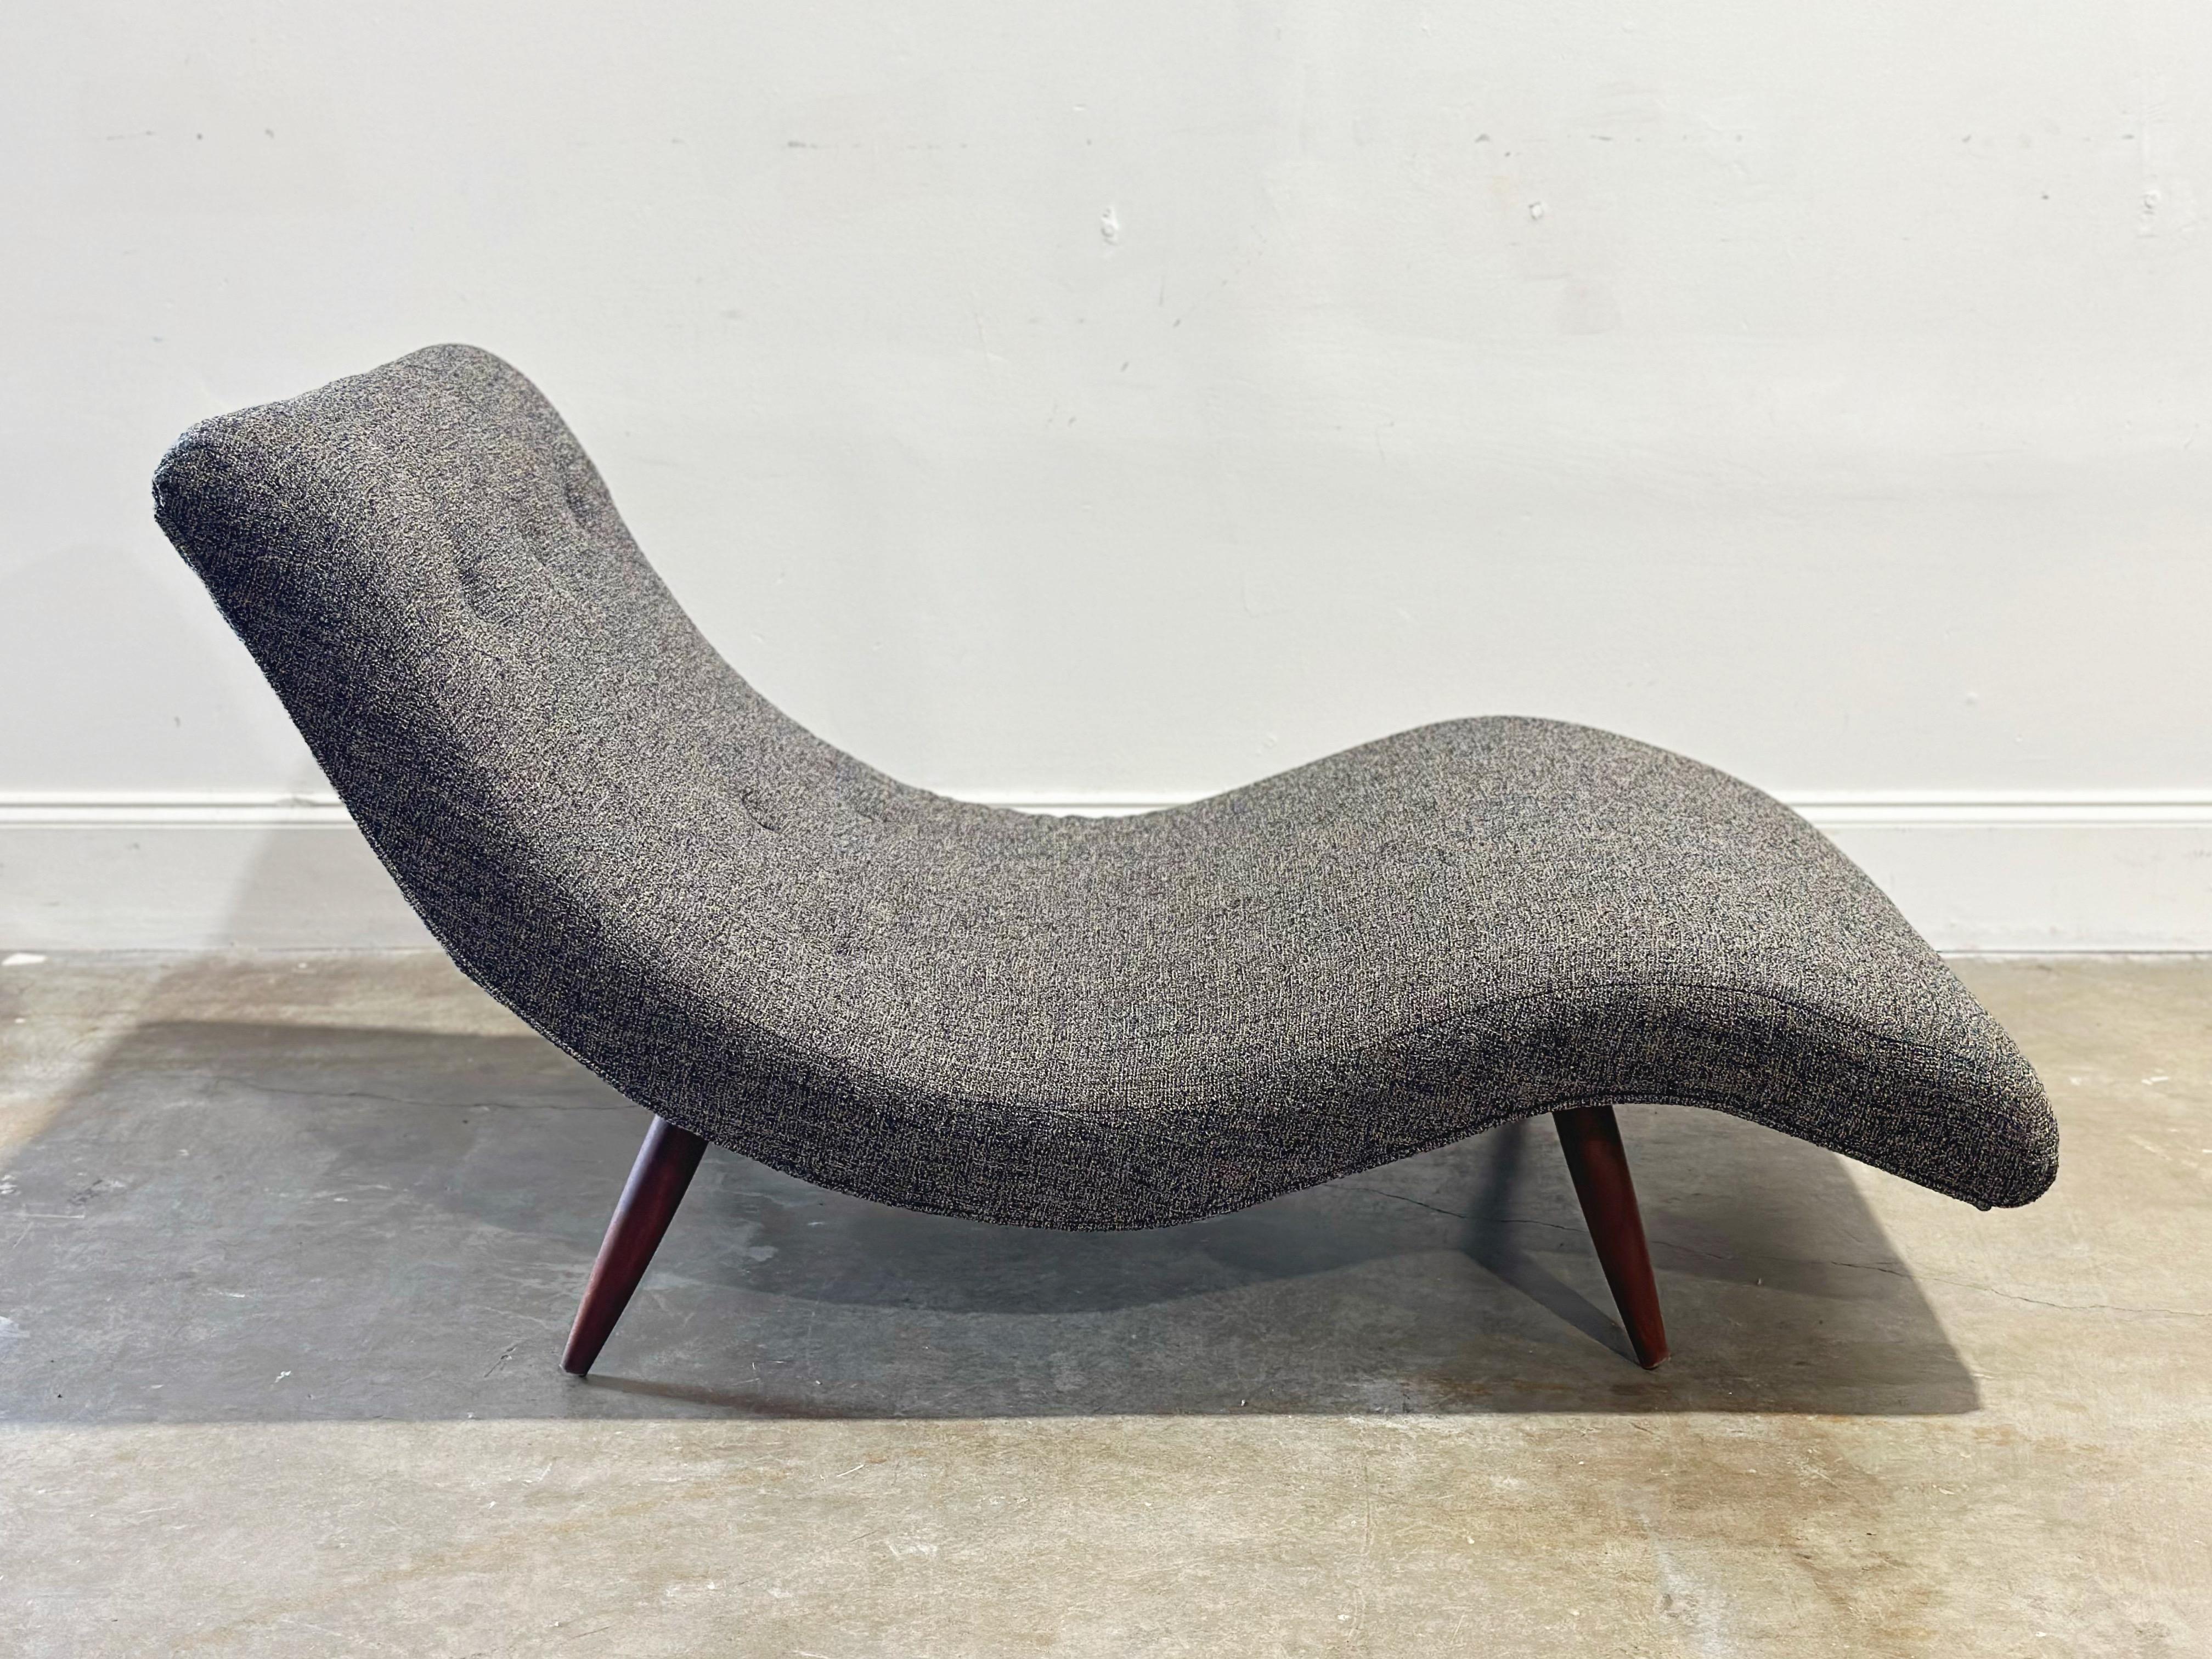 Midcentury Modern Adrian Pearsall Wave Chaise Lounge - Modernist Lounge Chair In Good Condition In Decatur, GA